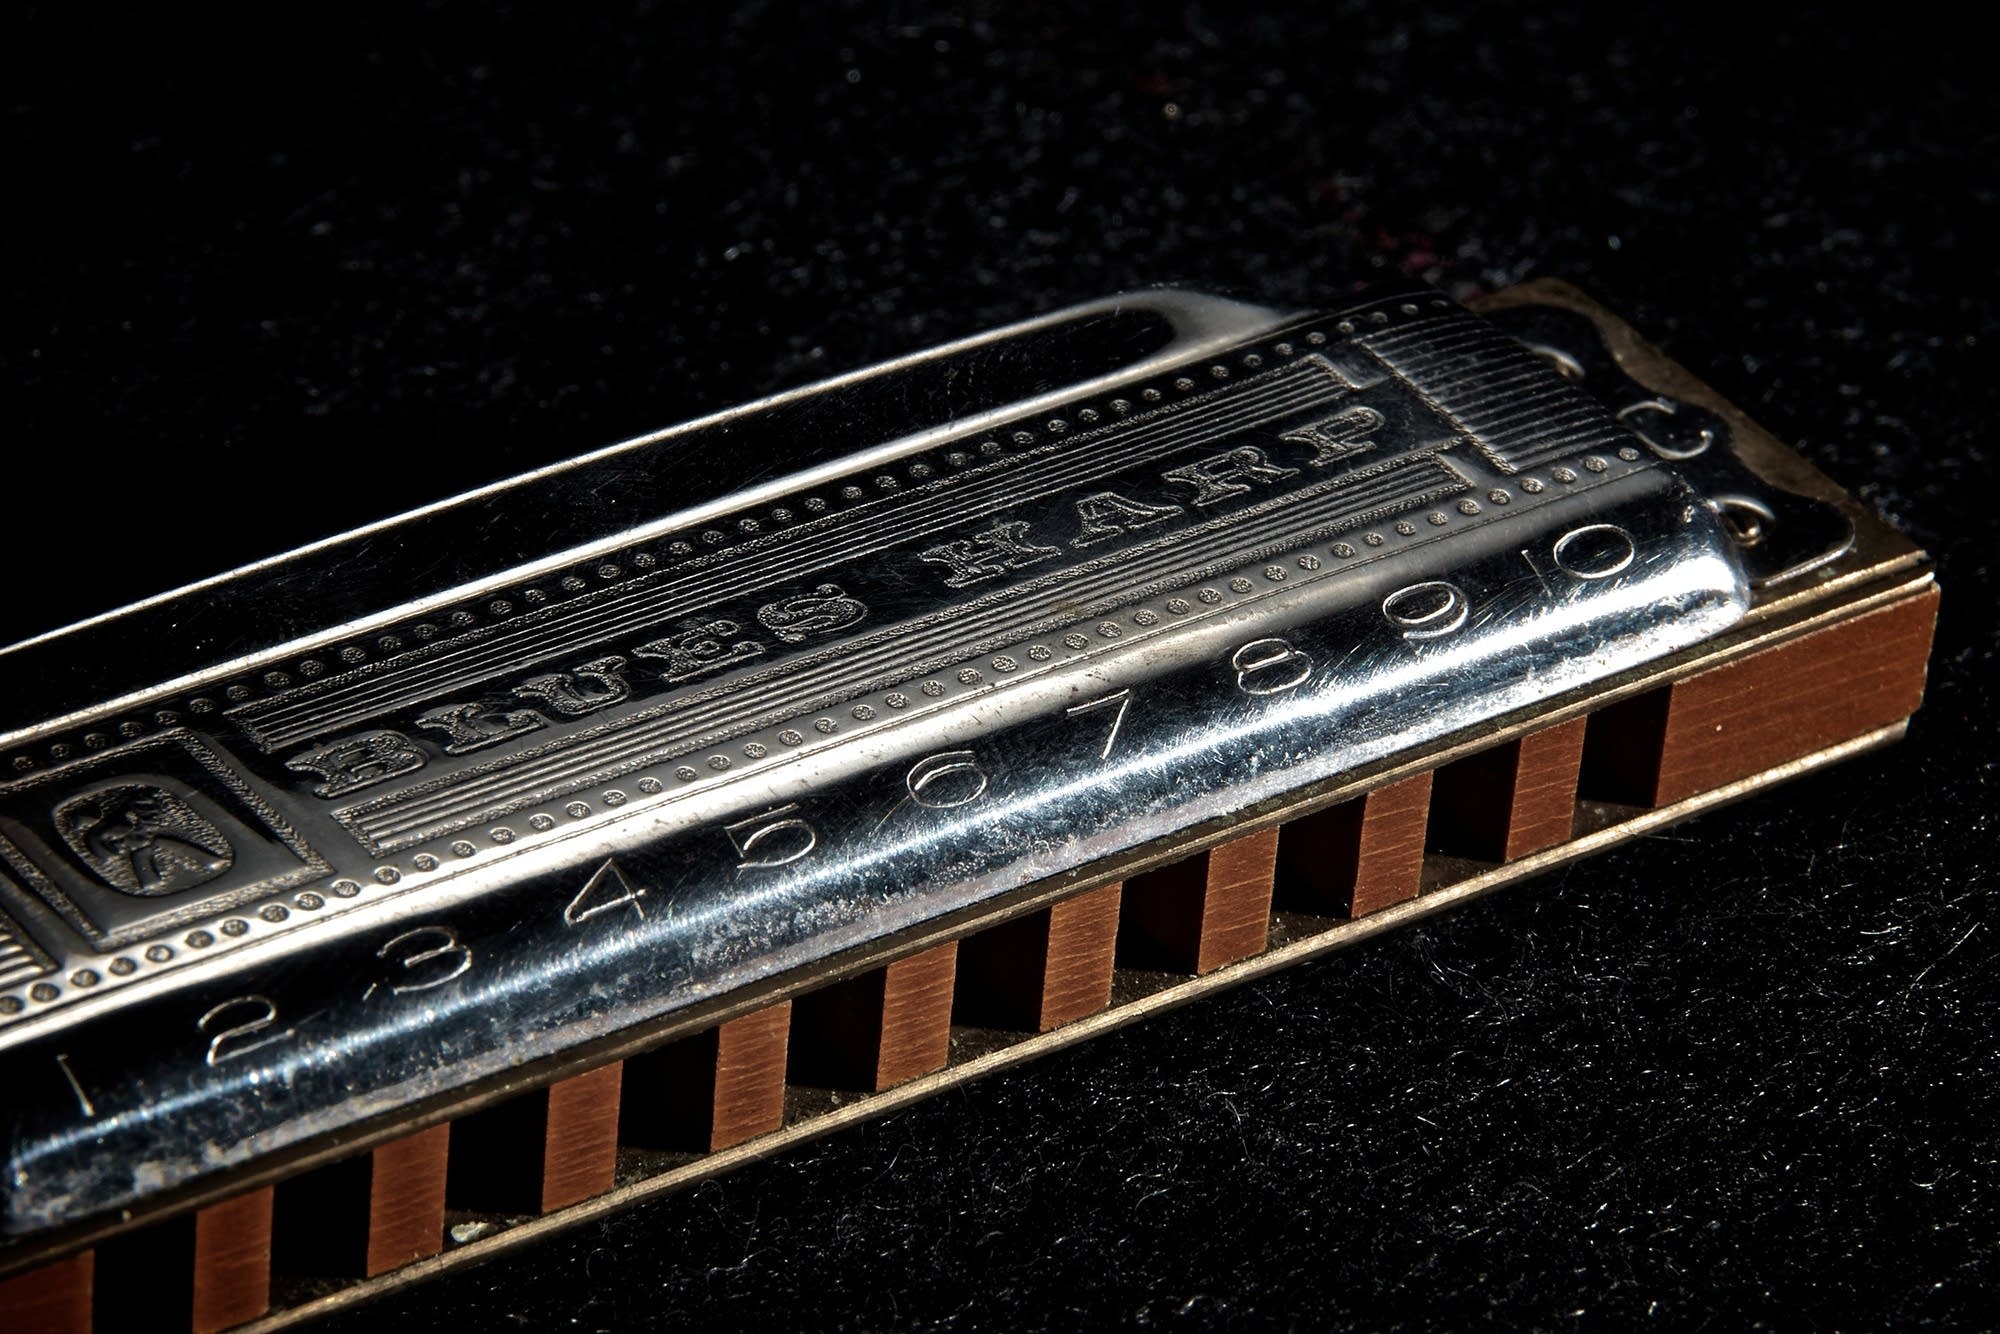 Harmonica: Music, Wind Instrument, Blues Harp, Using The Mouth To Direct Air, Wooden And Metal Corpus. 2000x1340 HD Wallpaper.